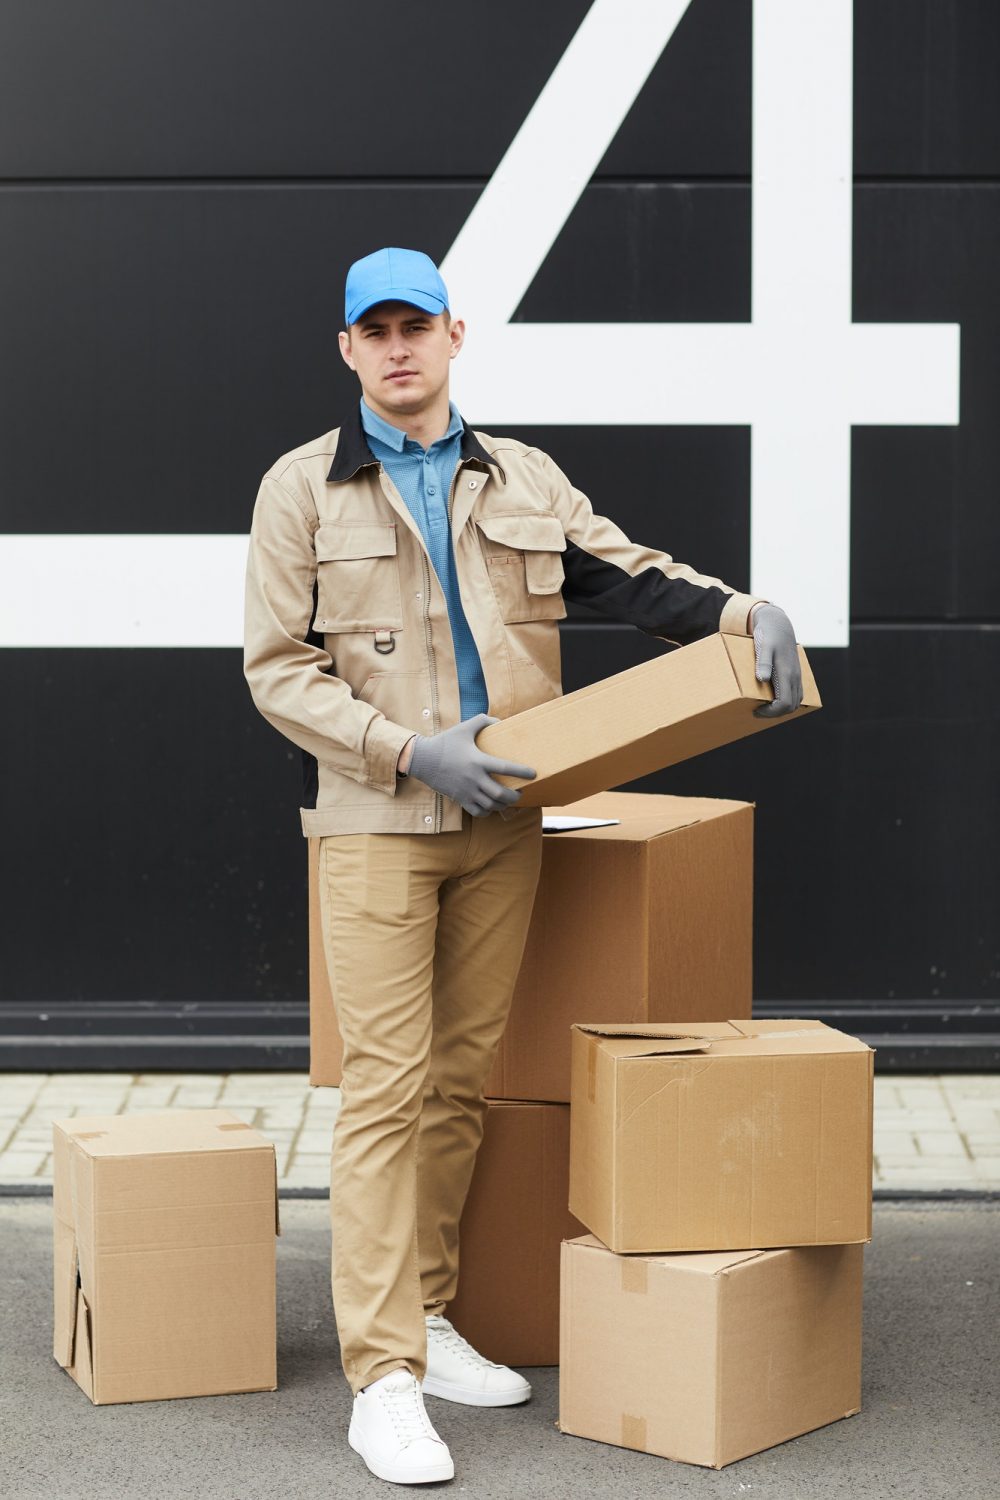 courier-working-with-parcels-in-warehouse-e1618304334390